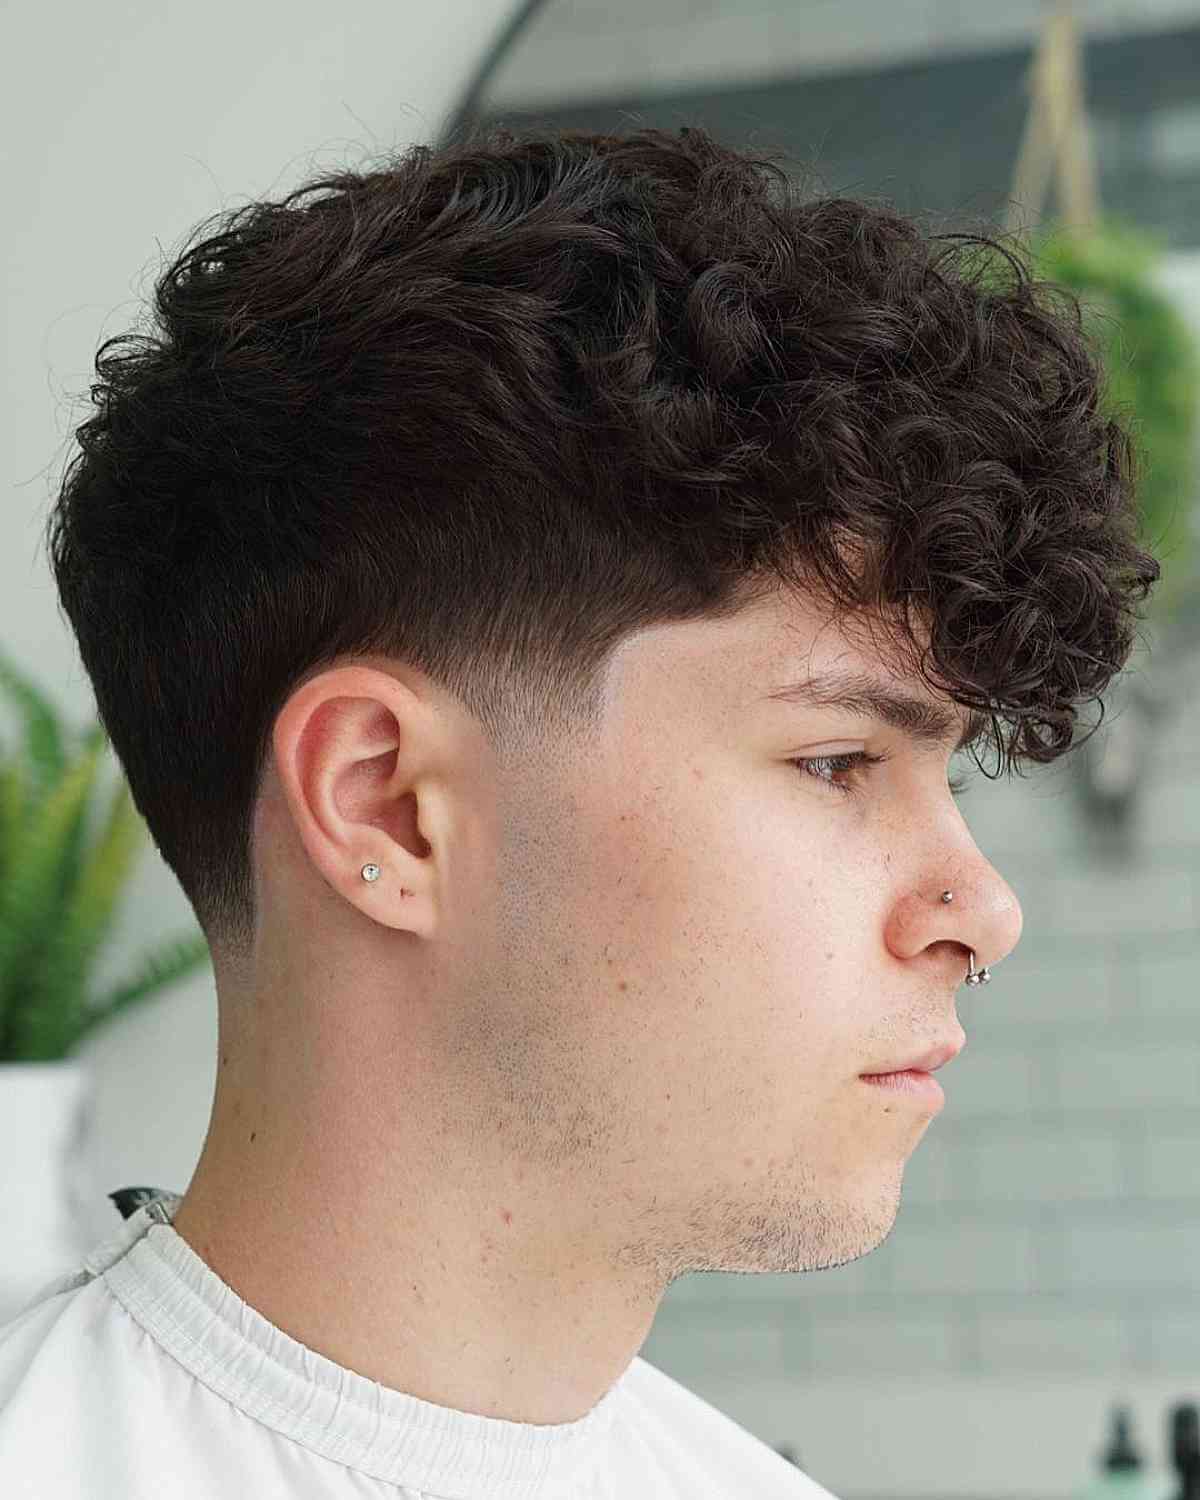 Classic Low Taper Fade with Loose Curls on Top for Men